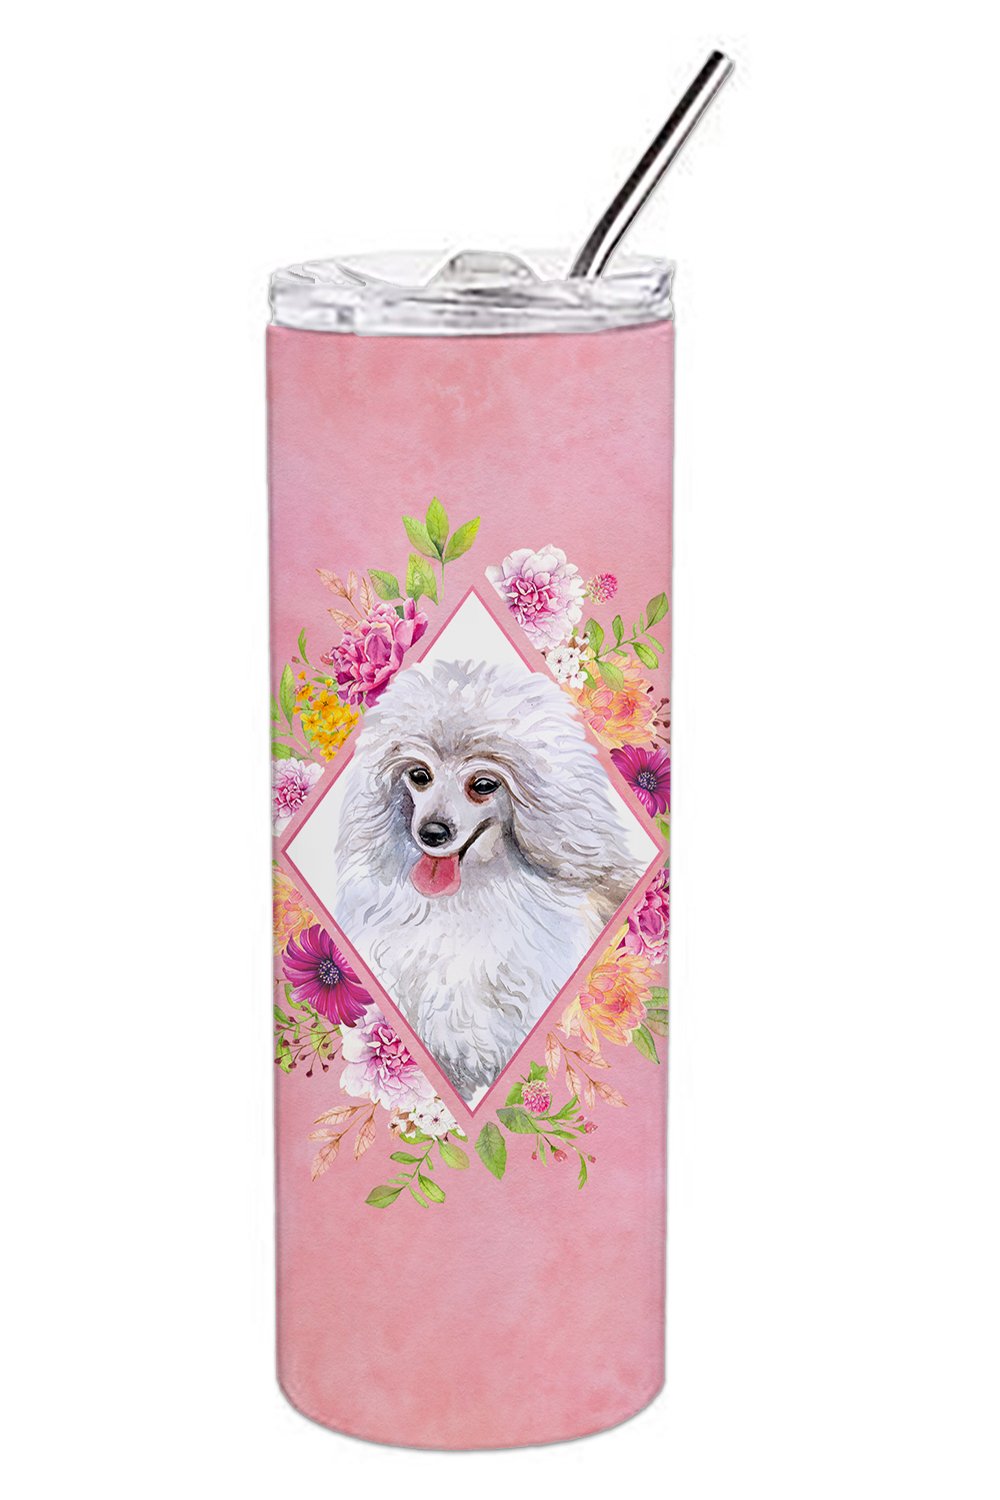 White Mini Poodle Pink Flowers Double Walled Stainless Steel 20 oz Skinny Tumbler CK4172TBL20 by Caroline's Treasures